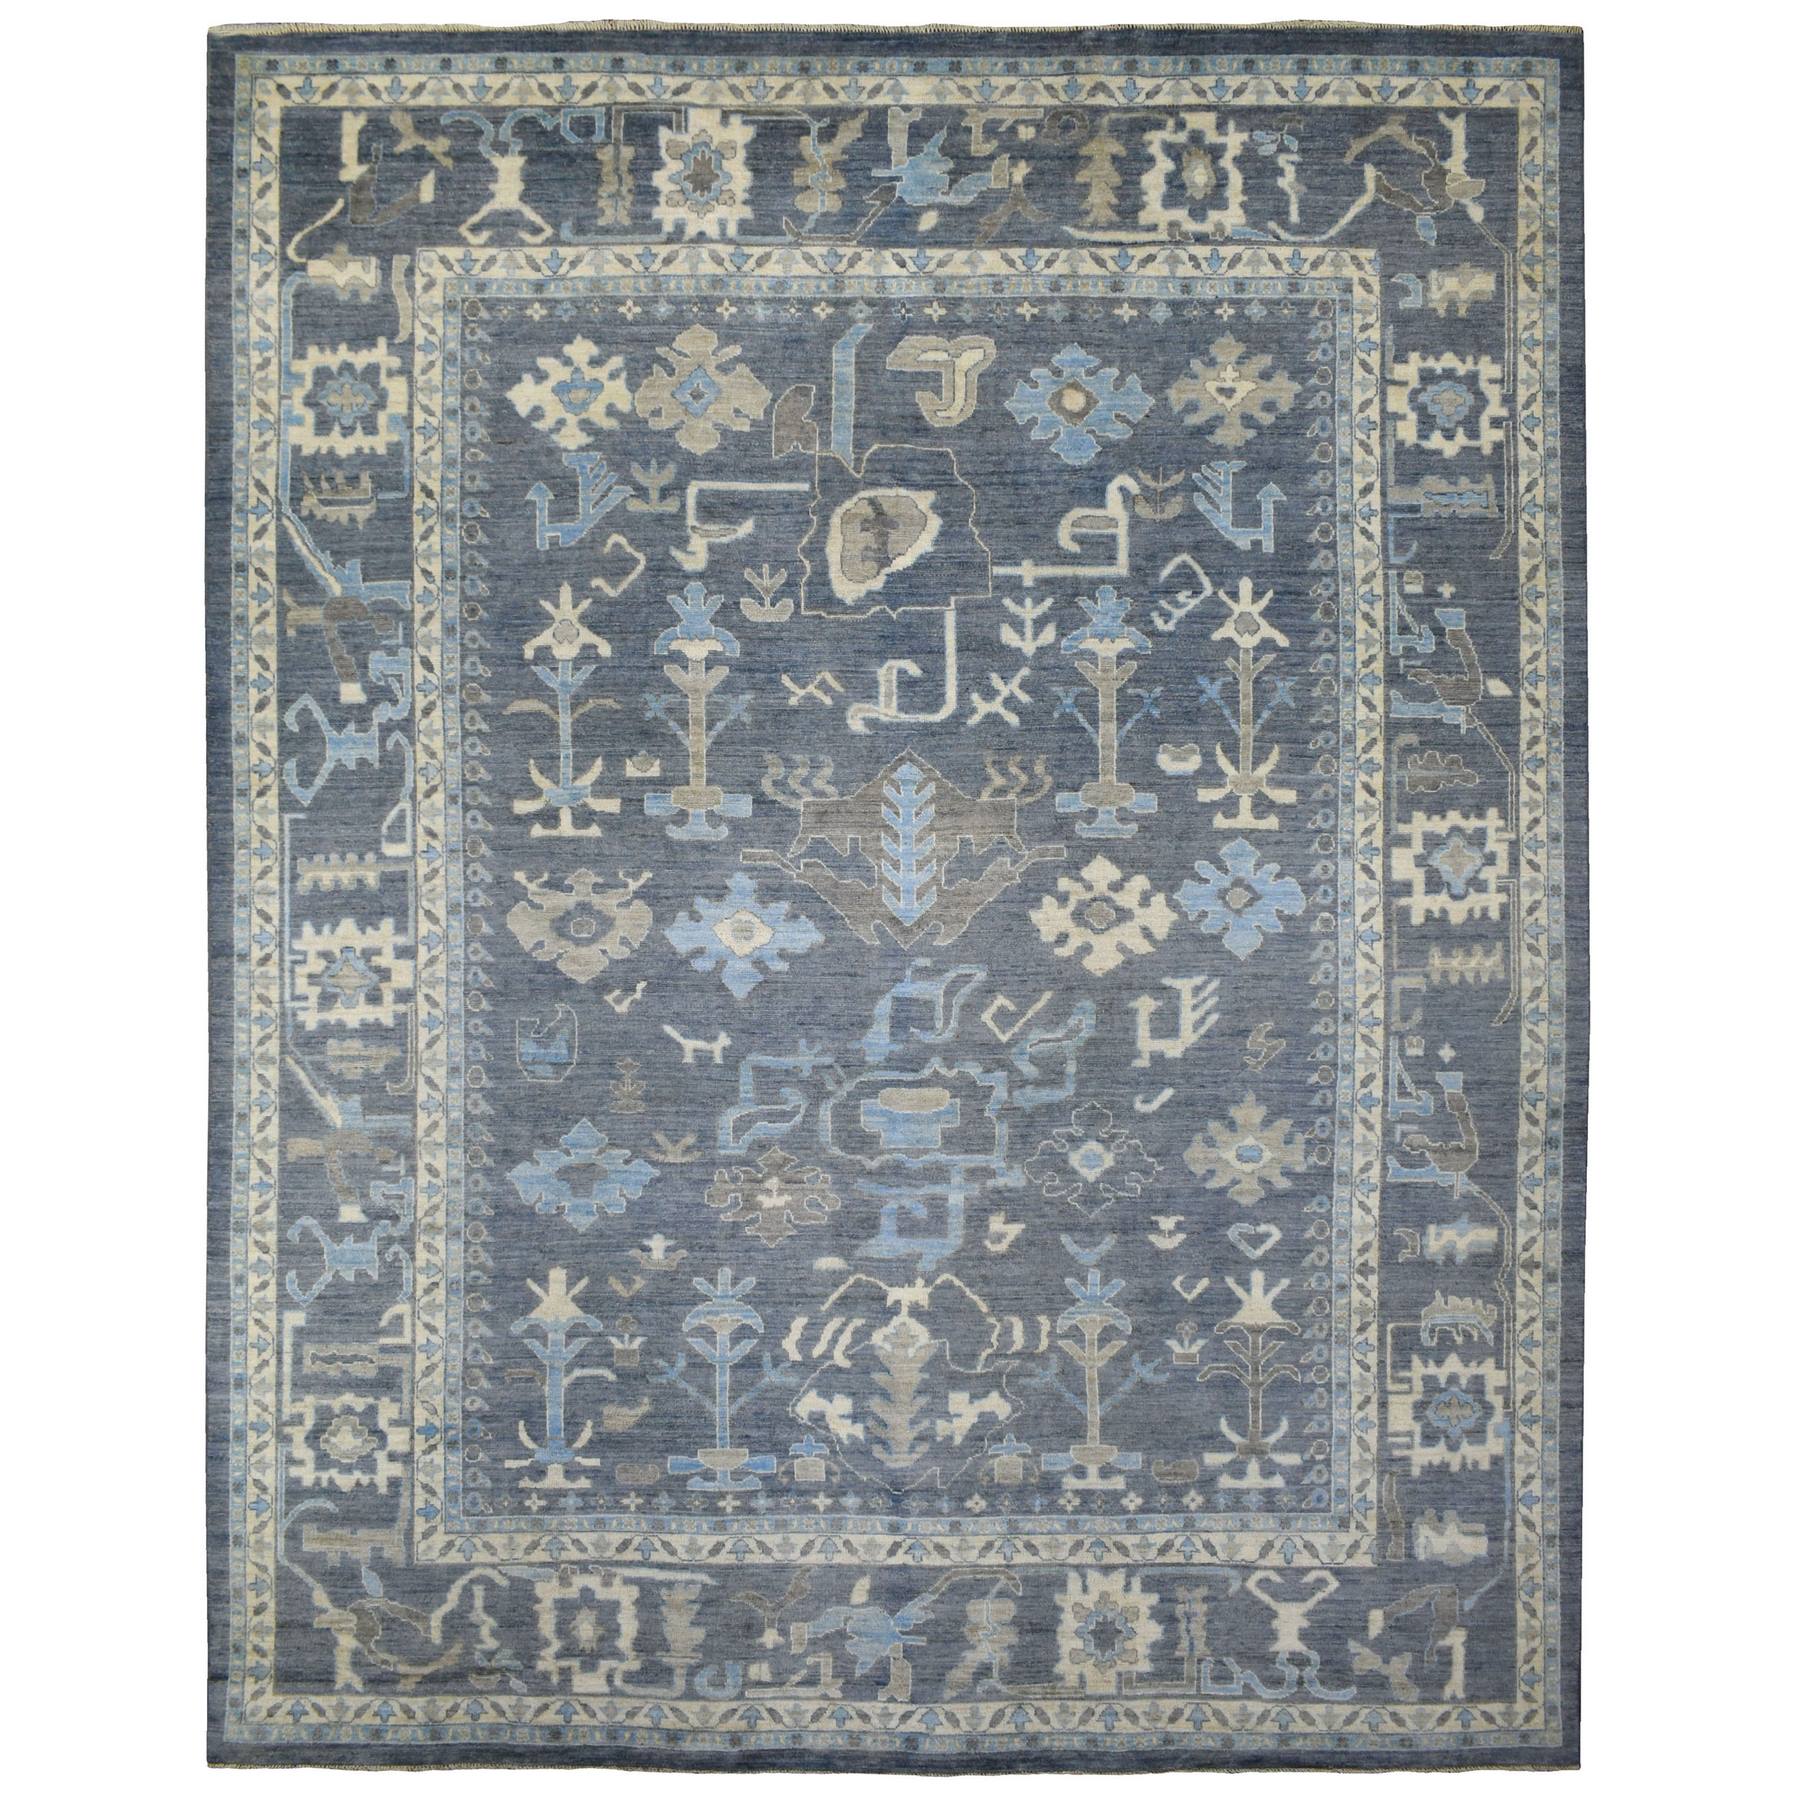 11'8"x14'5" Charcoal Gray with Touches of Blue and Ivory Angora Ushak Soft, Afghan Wool Hand Woven Oriental Oversized Rug 